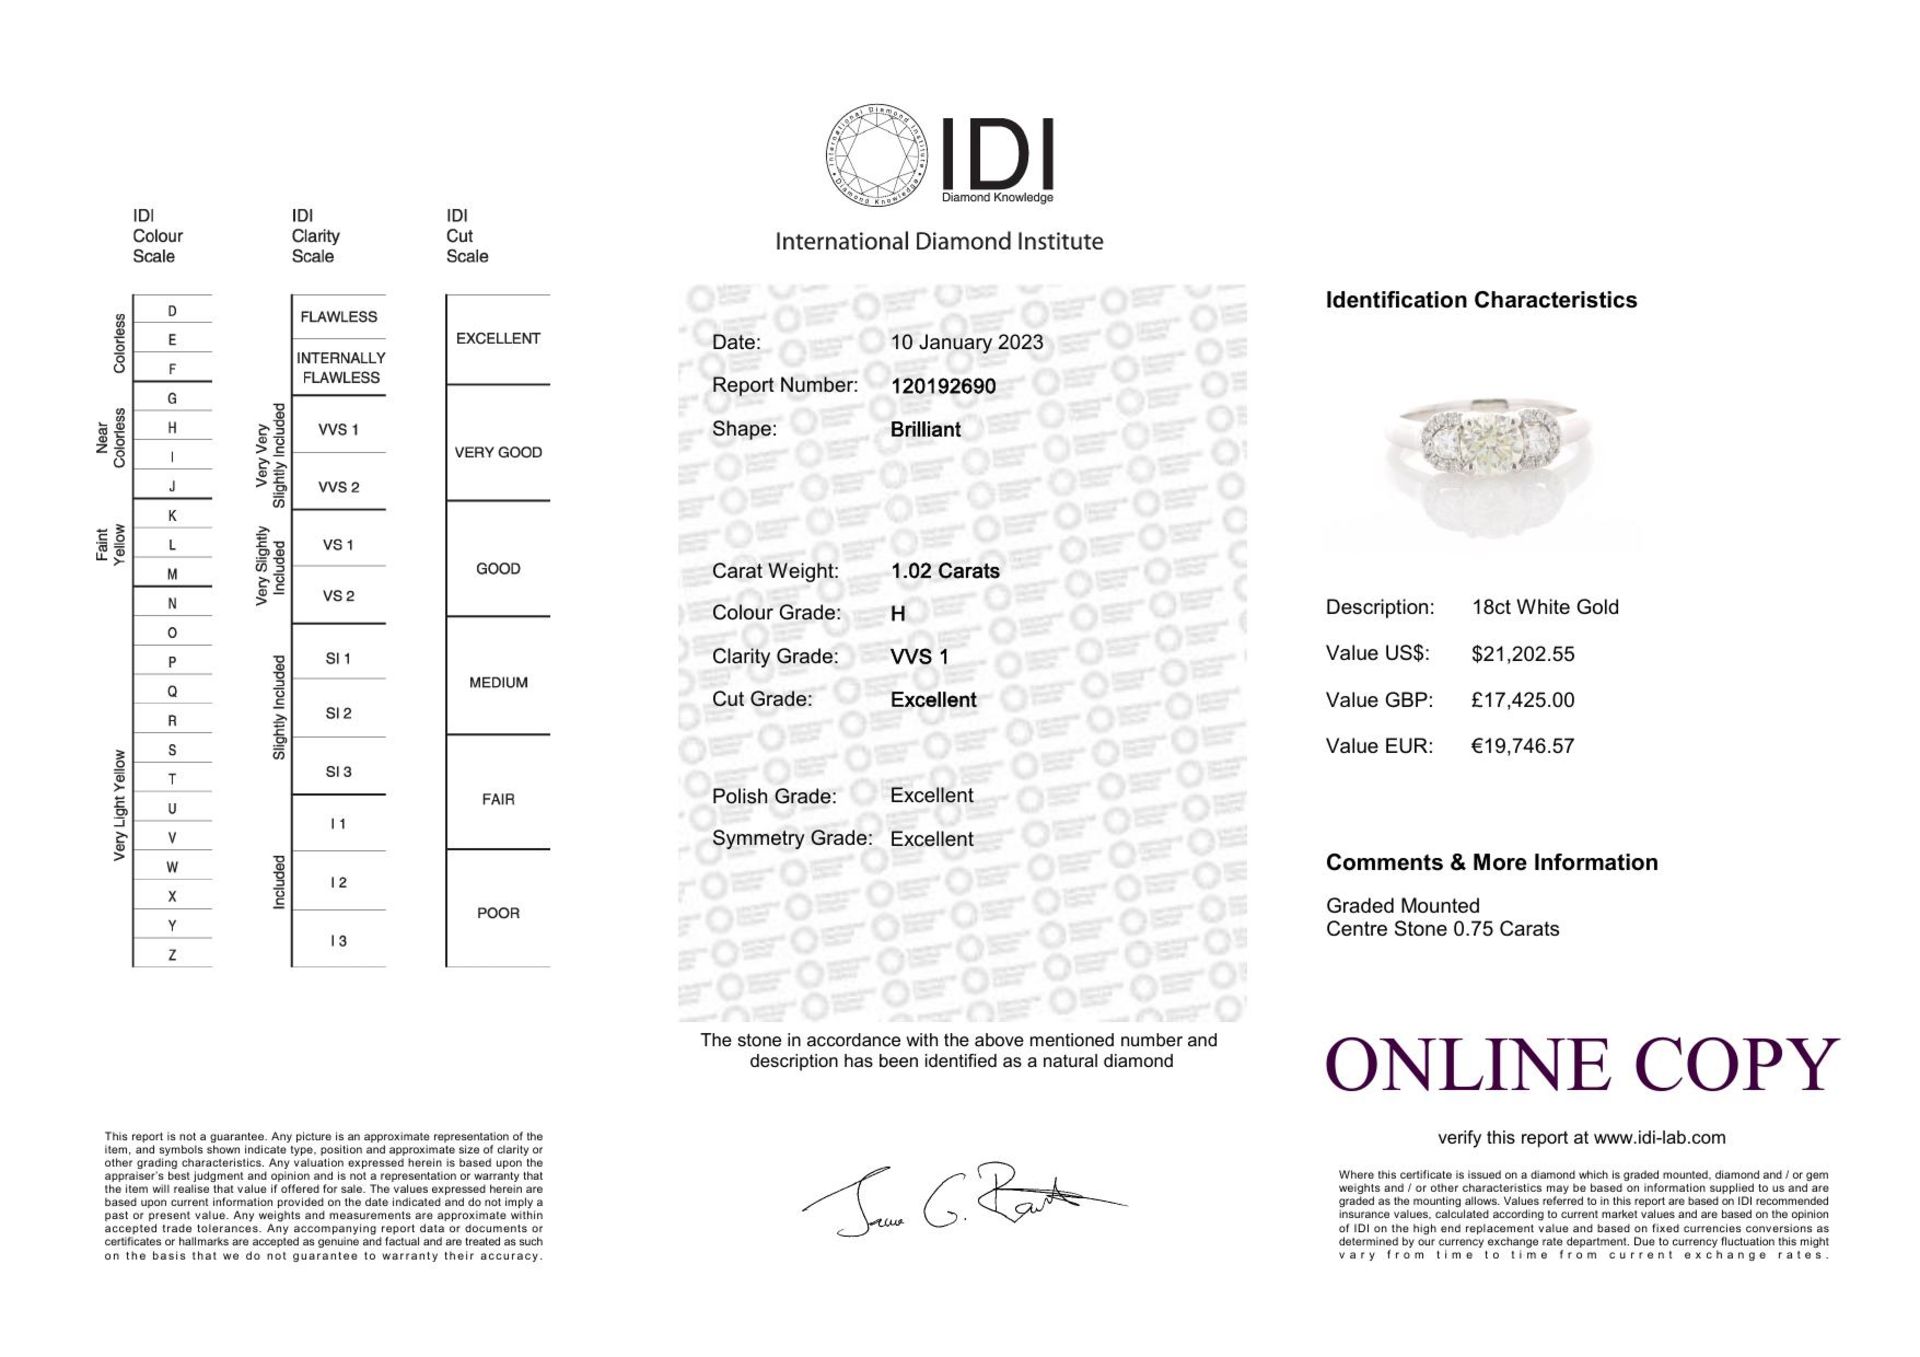 18ct White Gold Three Stone Claw Set Diamond Ring (0.75) 1.02 Carats - Valued By IDI £17,425.00 - - Image 5 of 5